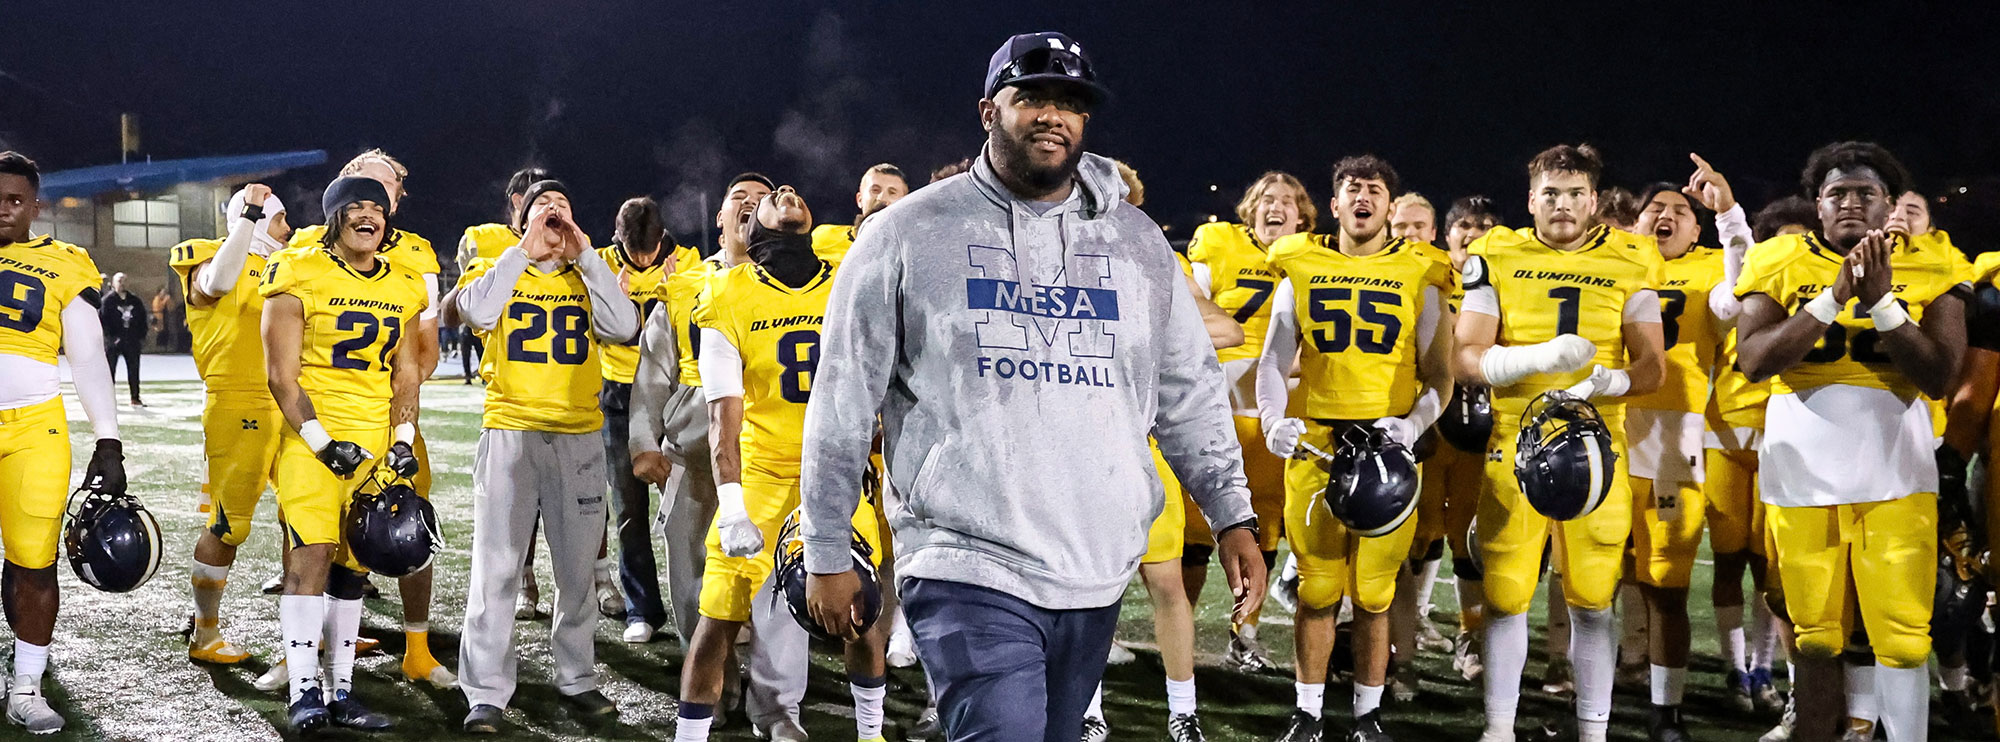 Coach Gary Watkins walks on the football field at night after a game. Football players are in yellow shirts behind him applauding.